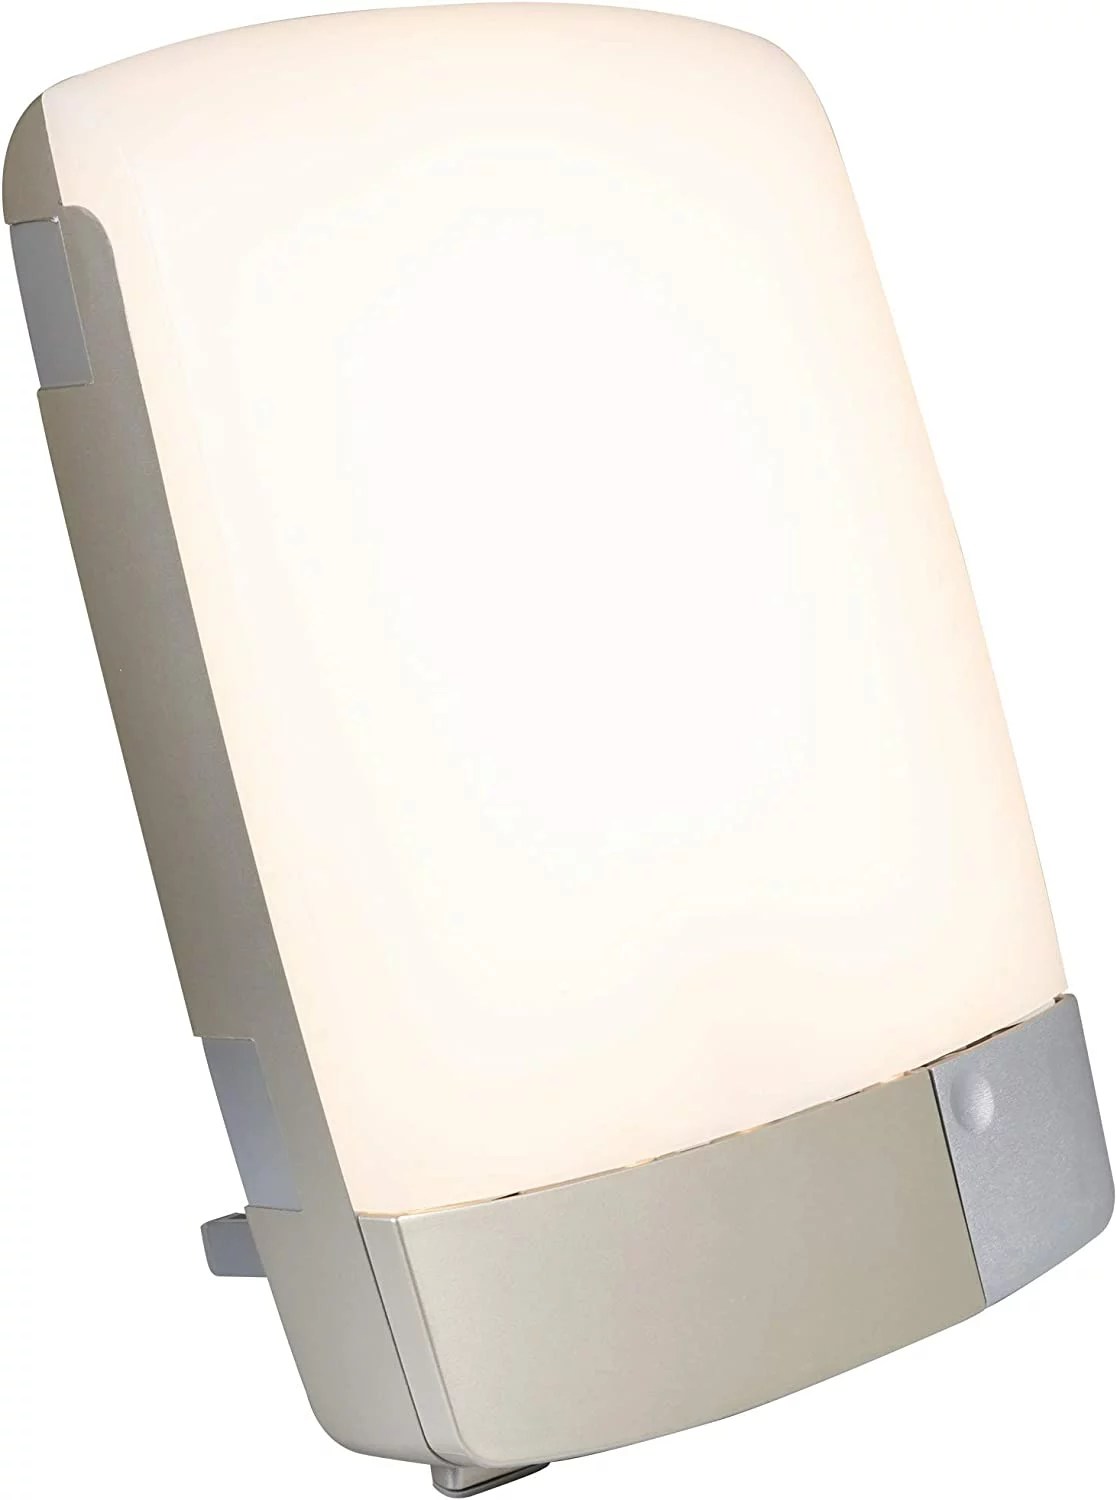 Carex Sunlite Bright Light Therapy Lamp